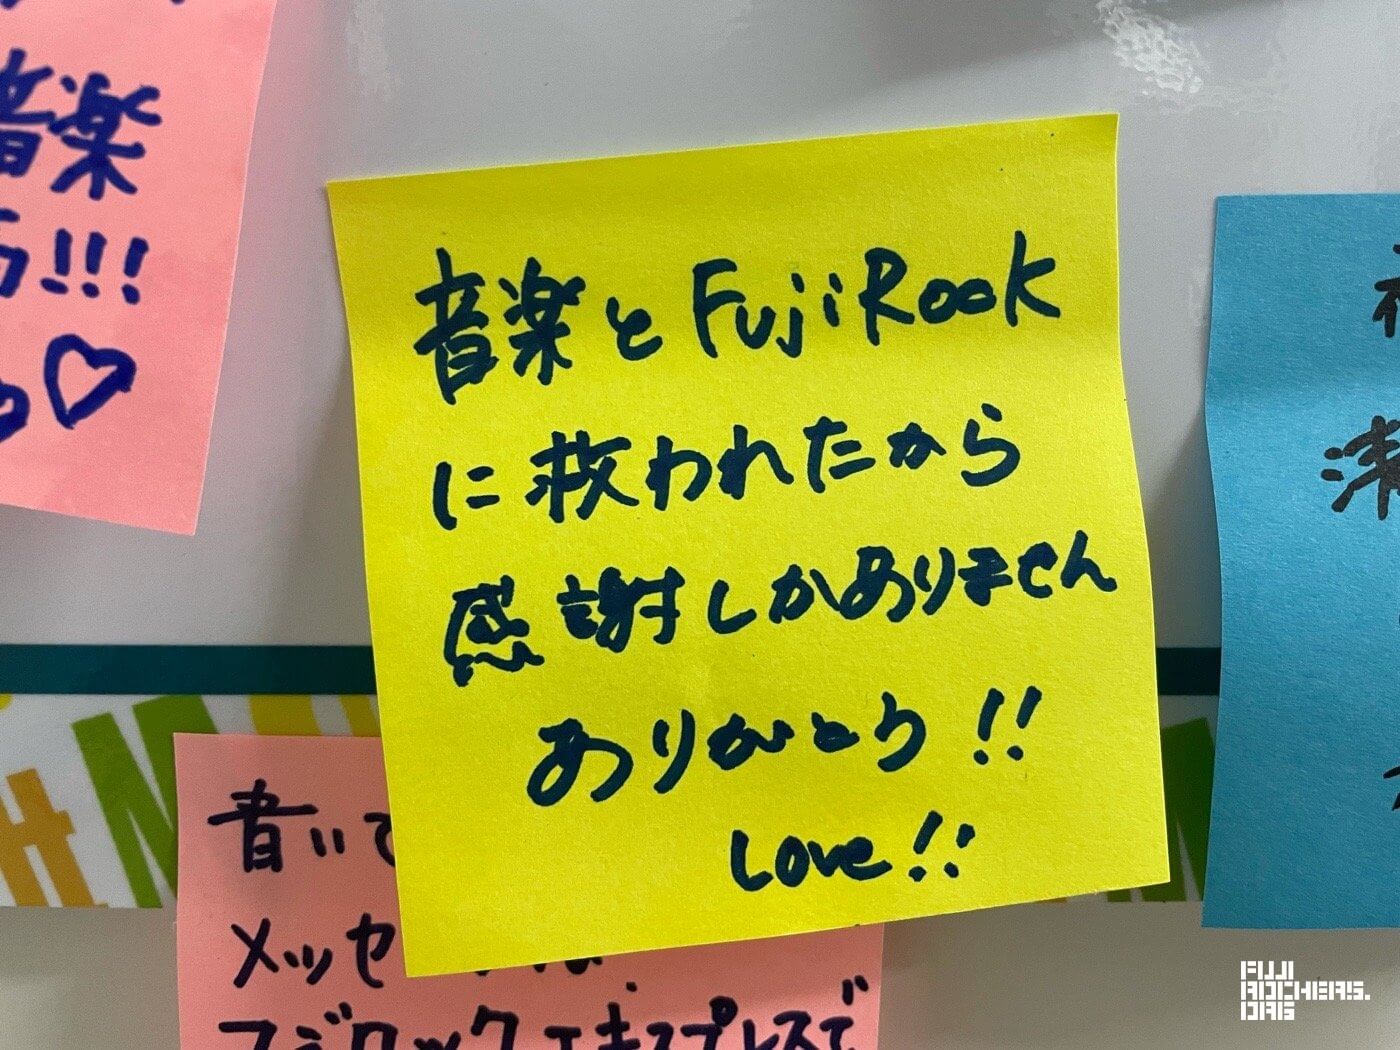 Message for FUJI ROCK #16